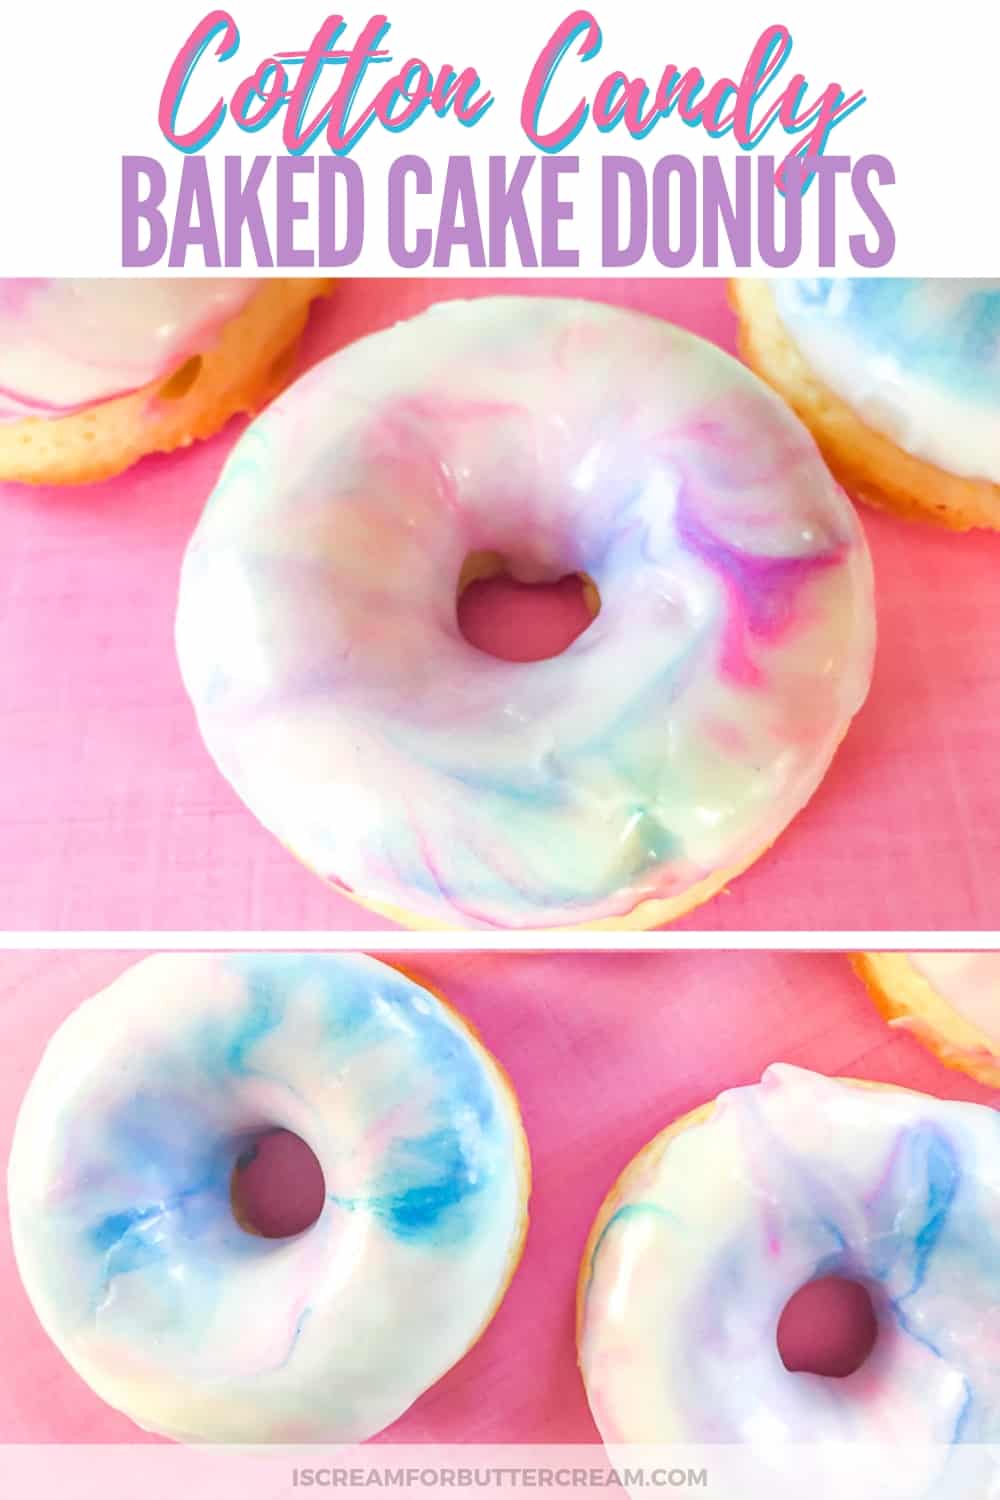 Cotton Candy Baked Cake Donuts New Pin 1